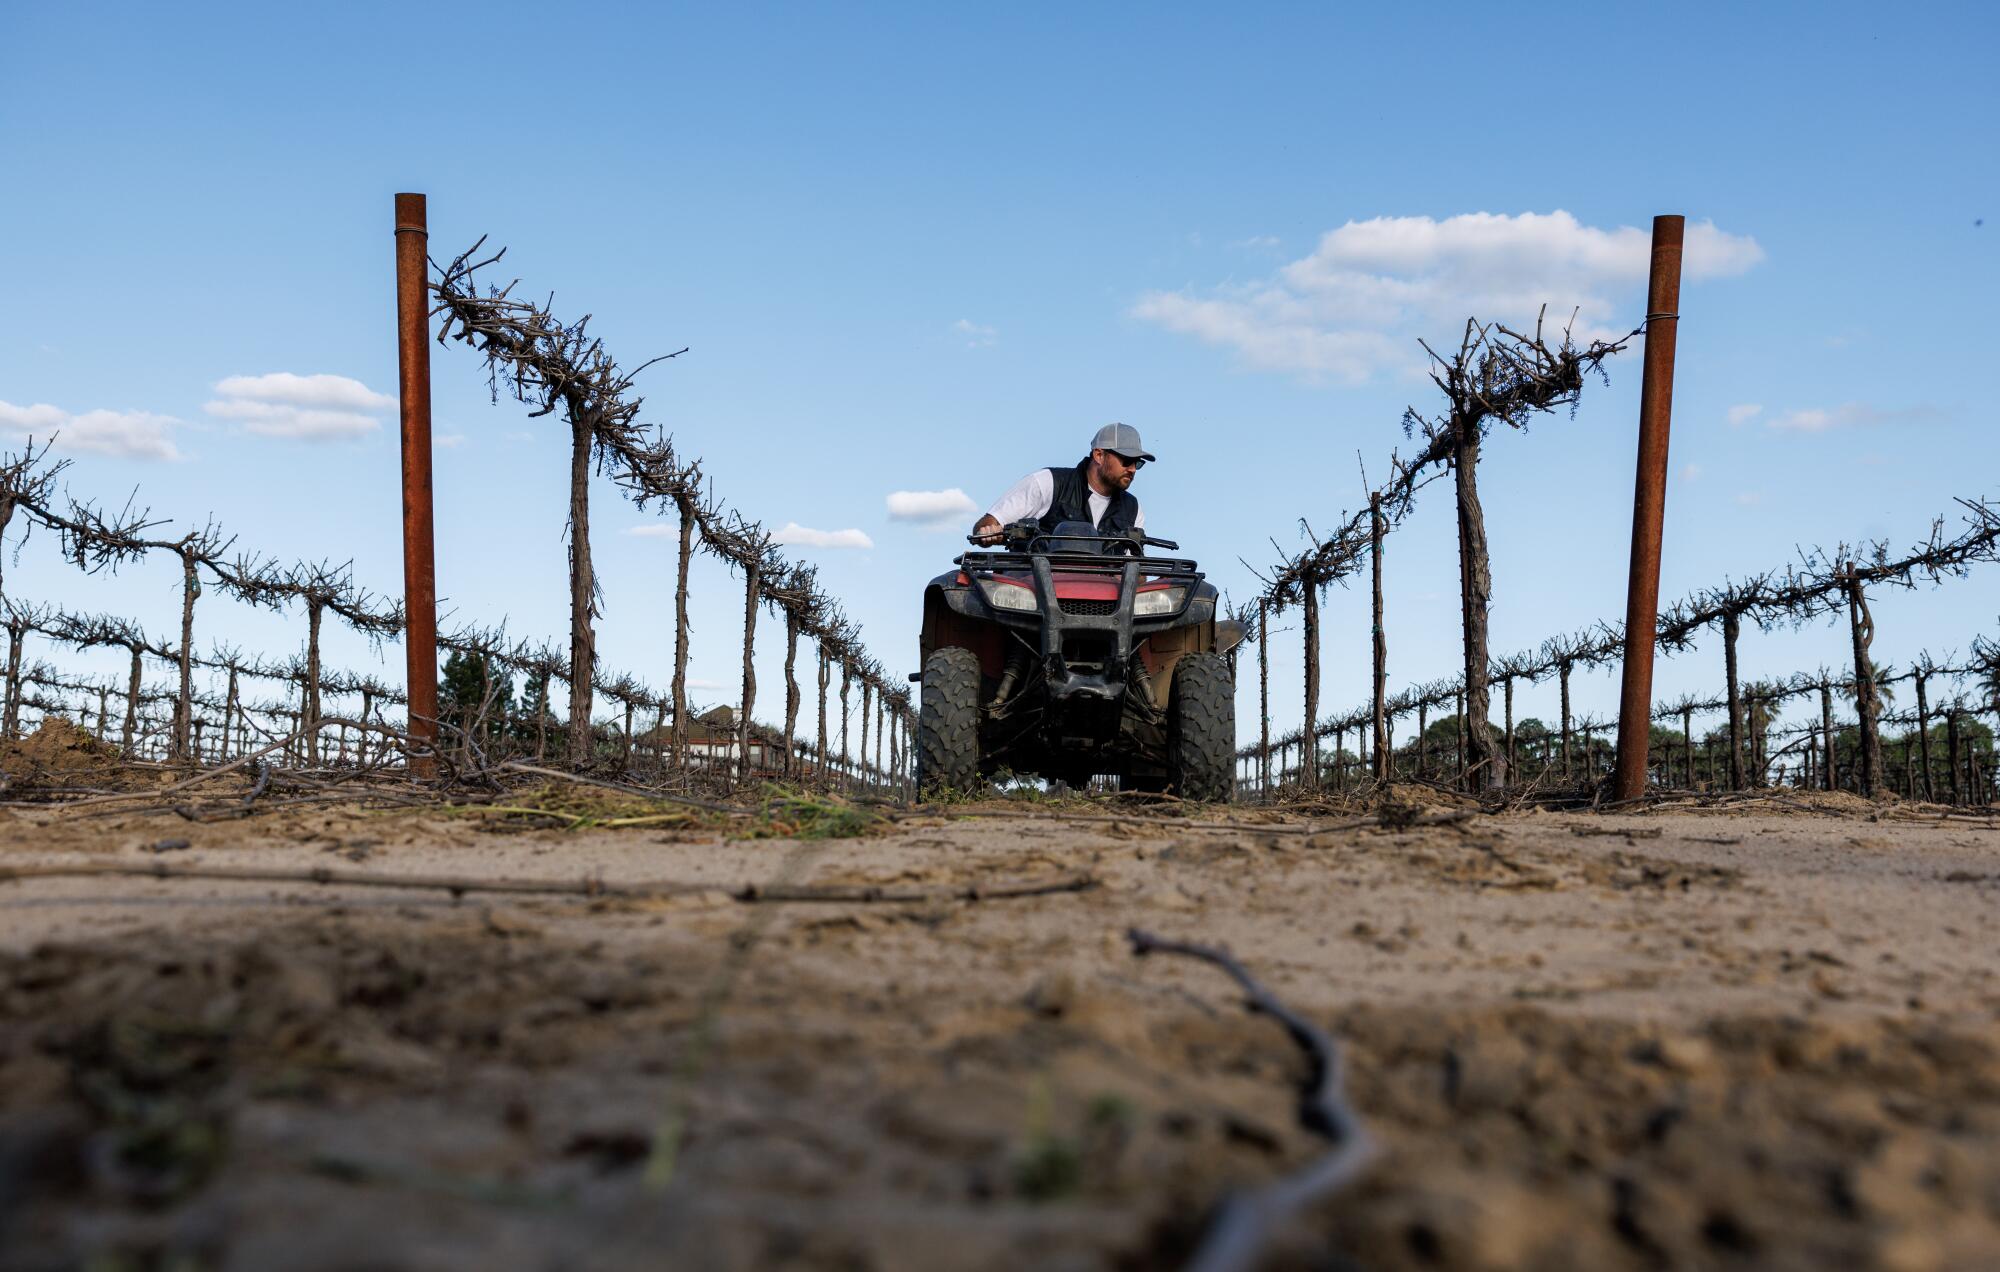 Fifth generation vineyard grower Greg Lauchland checks irrigation lines in the family's vineyard in Lodi.